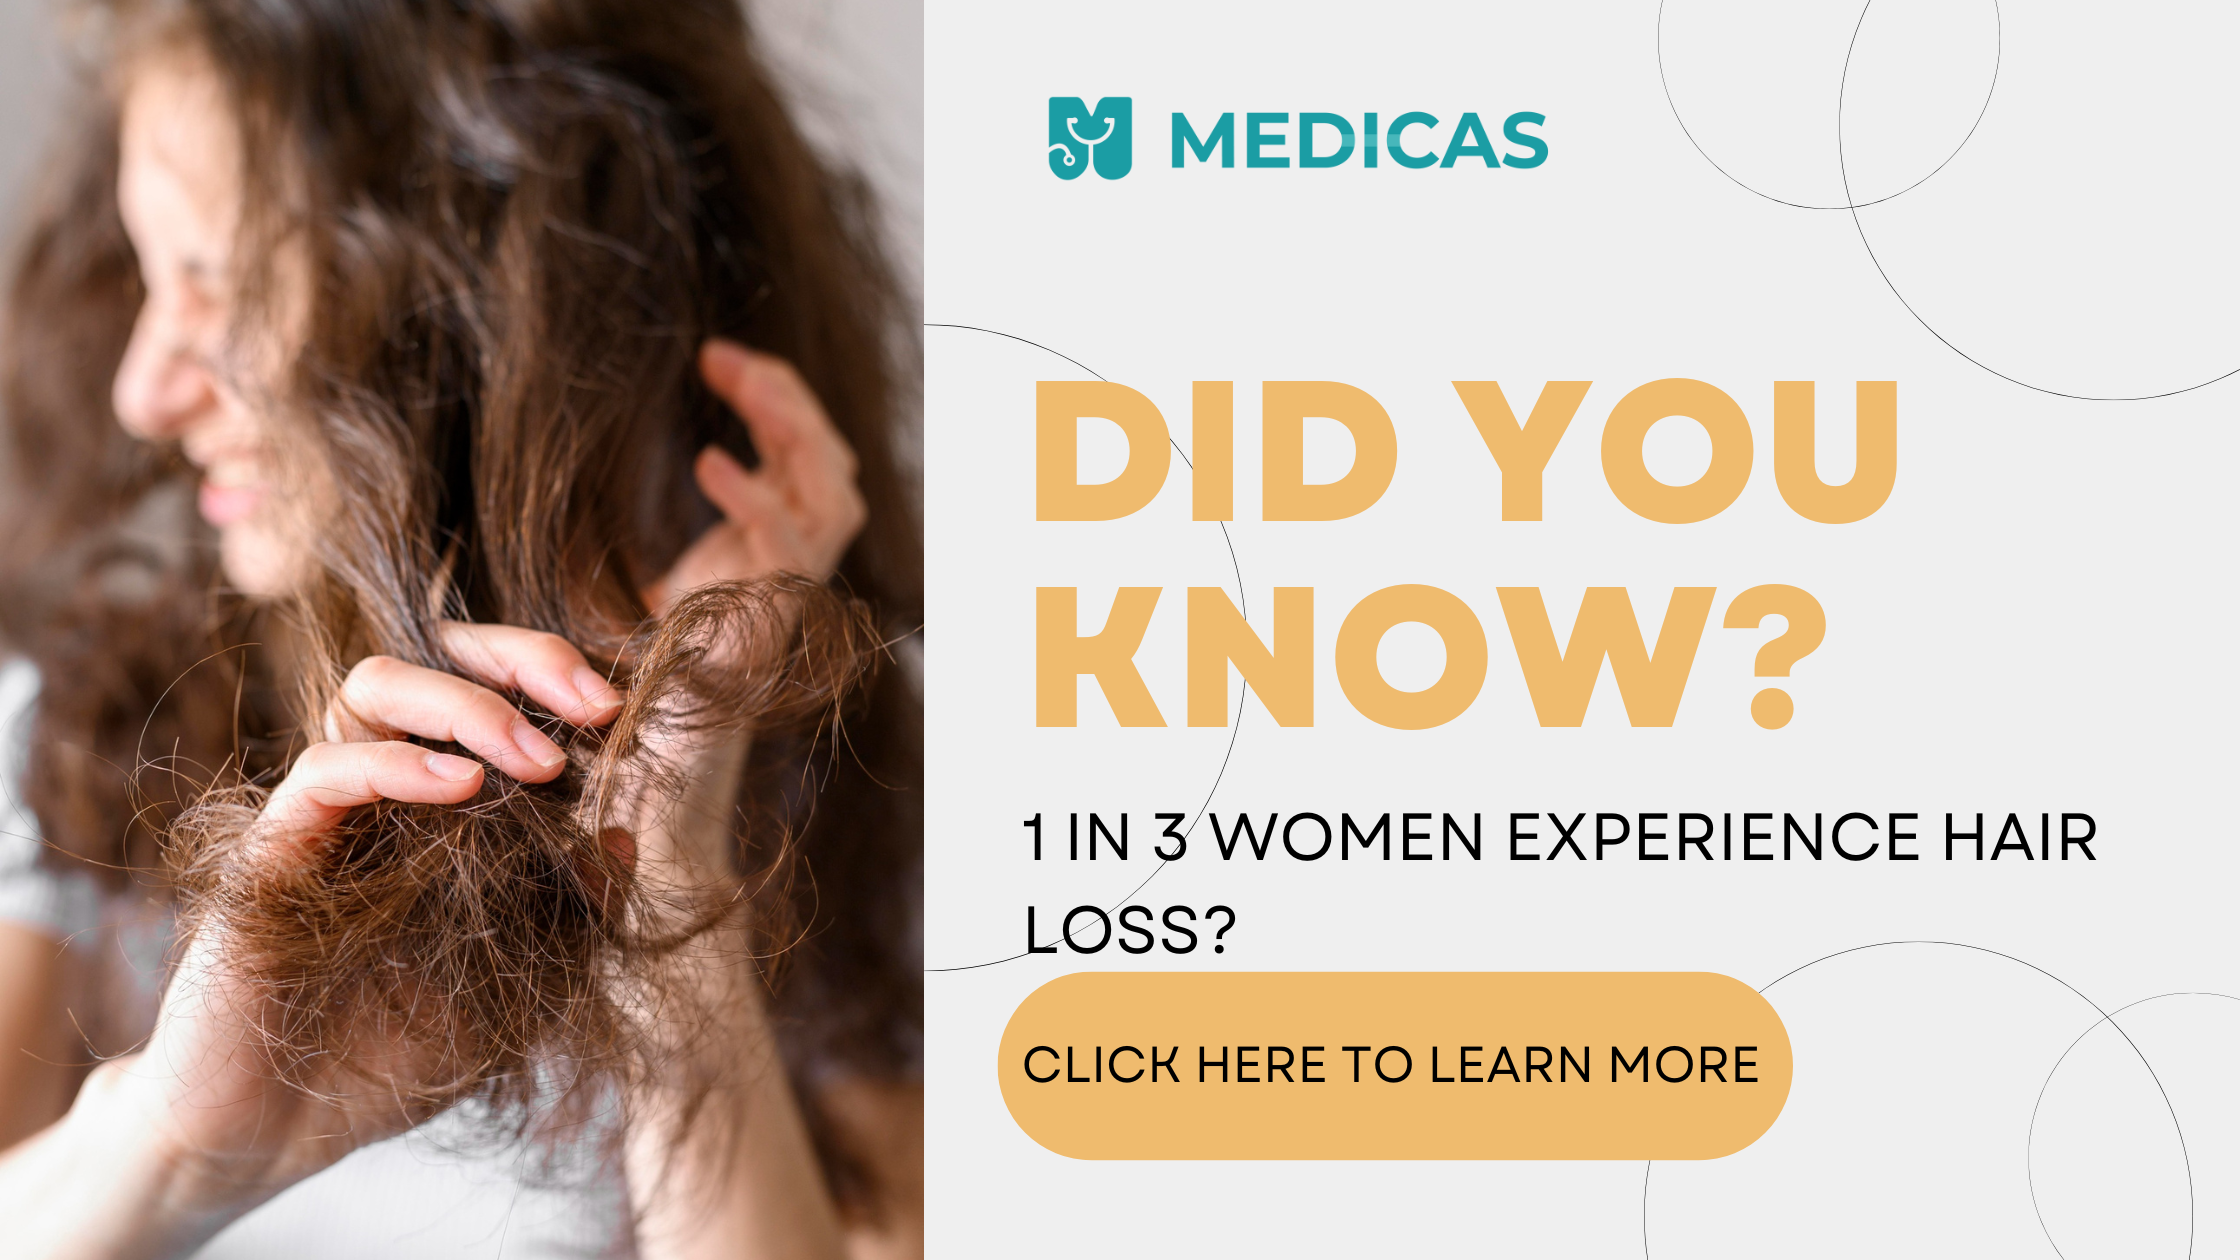 Hair loss in women – Symptoms, Causes and Prevention